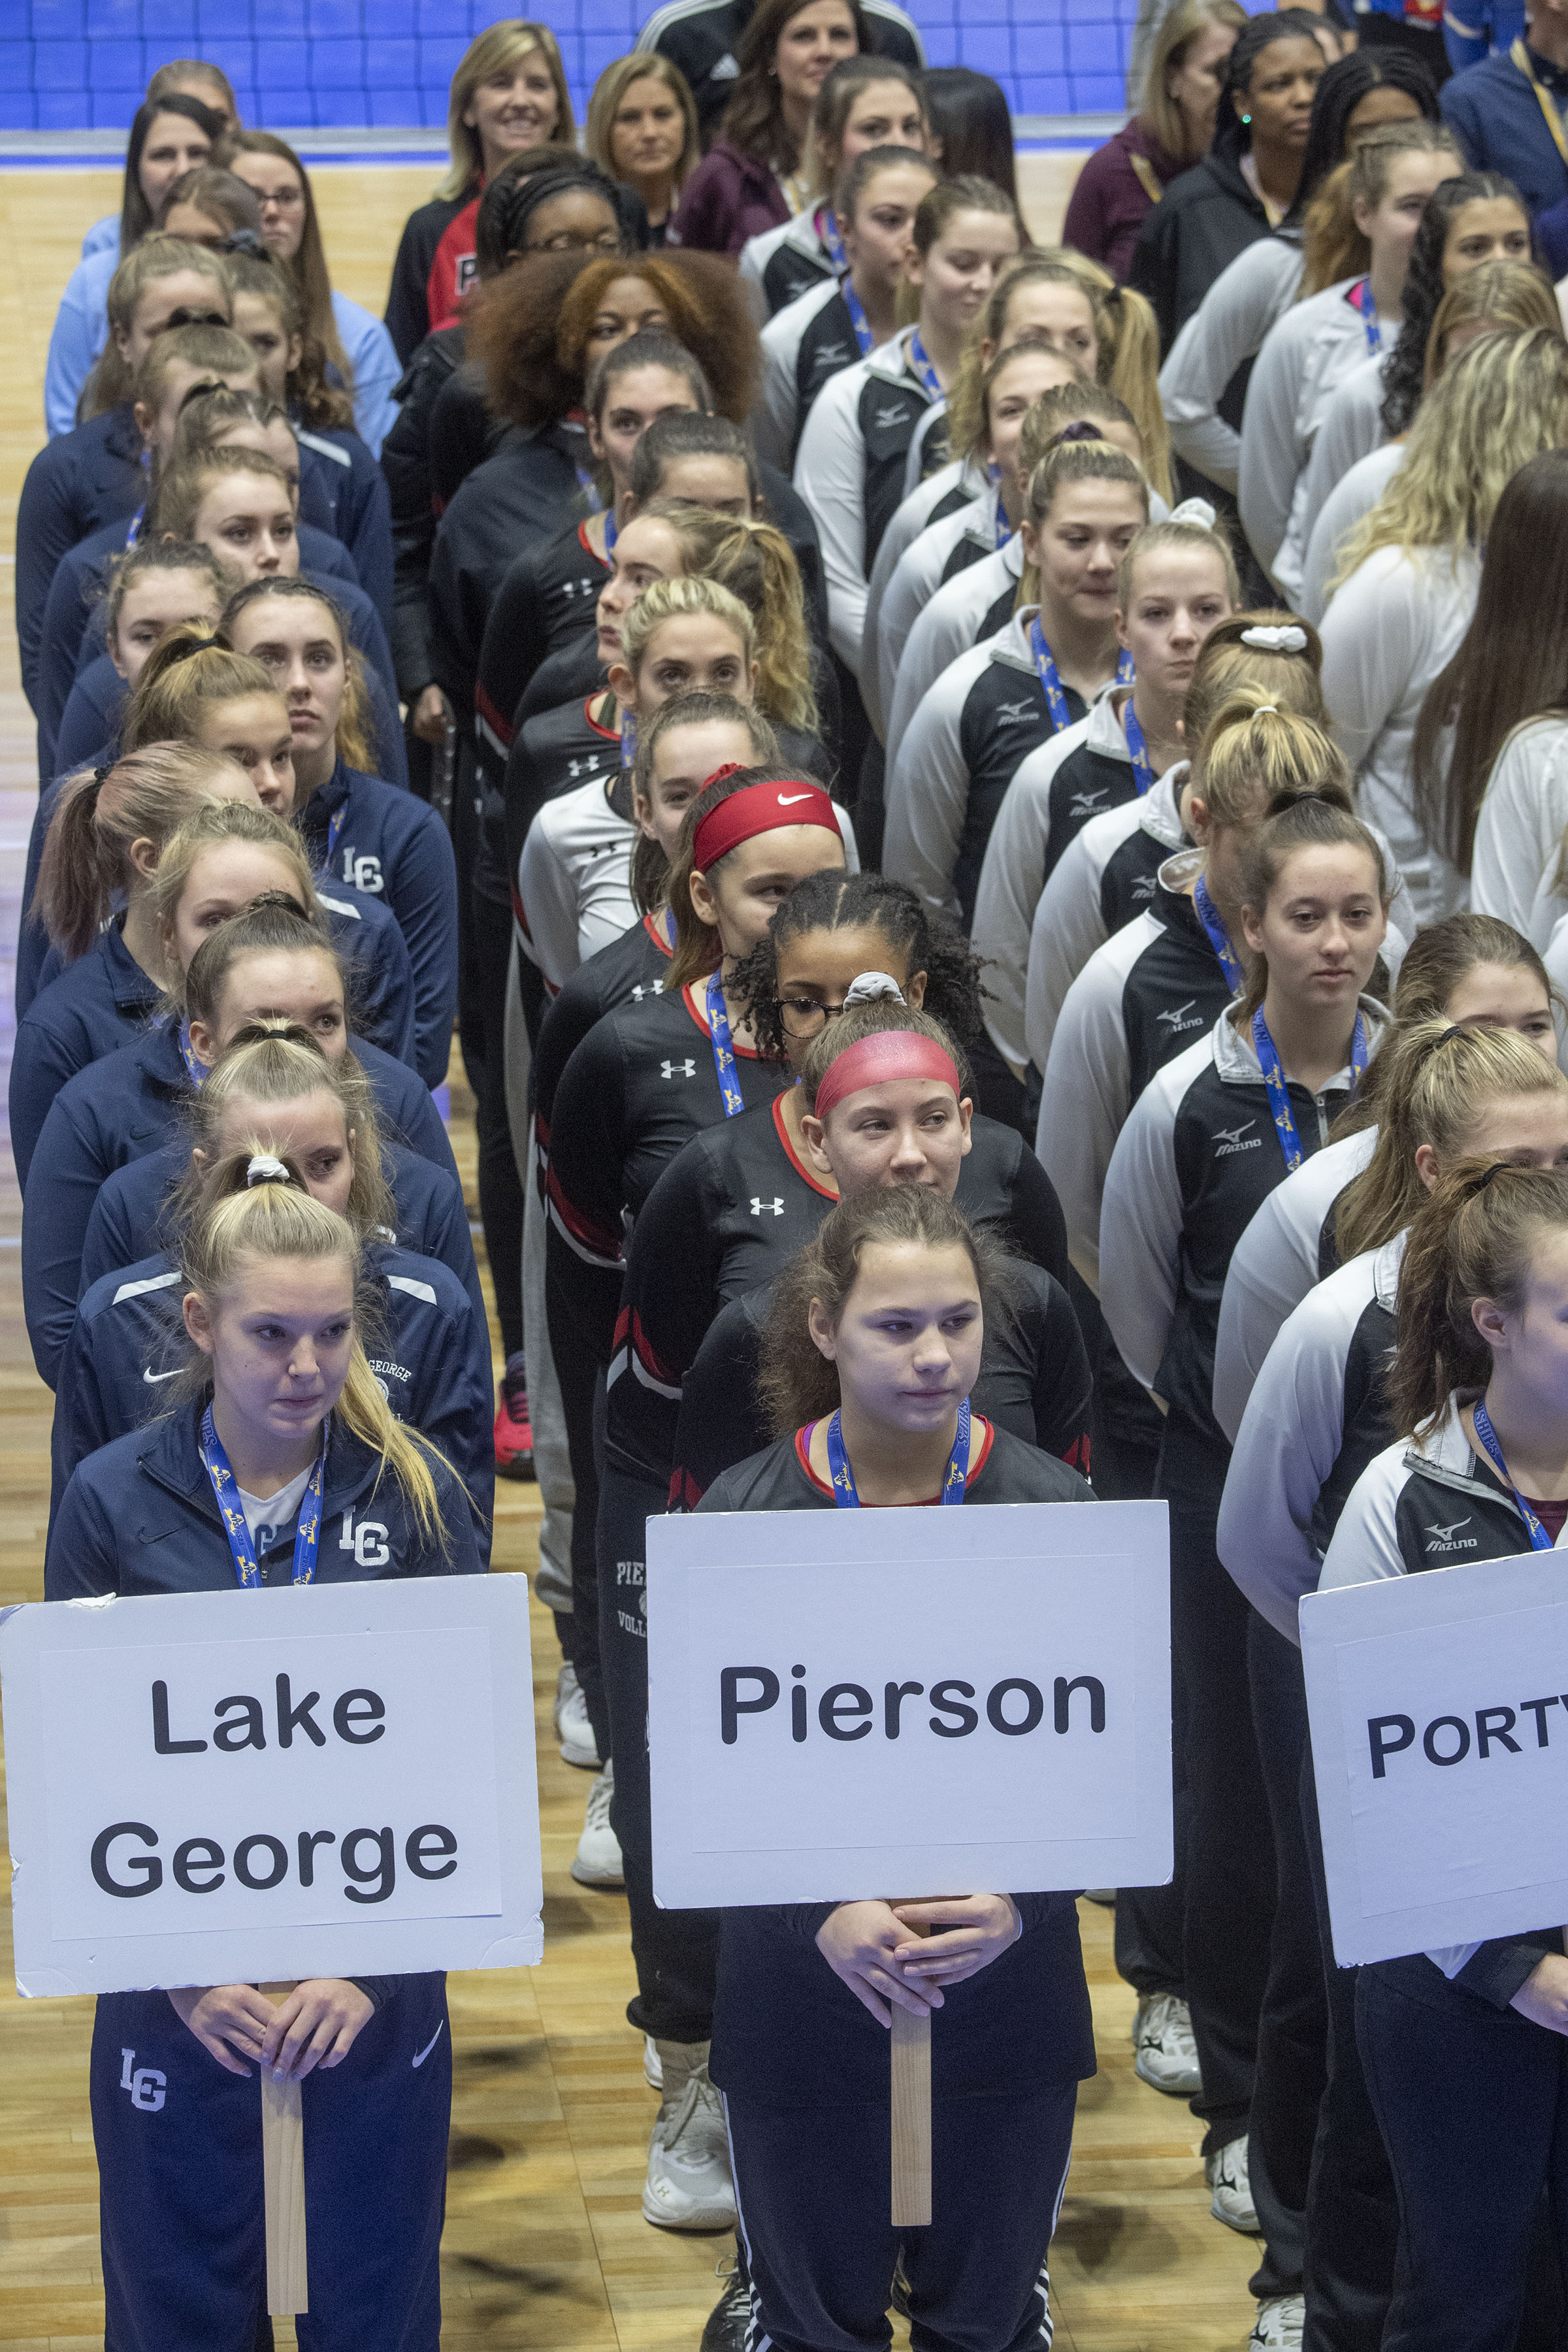 The Pierson/Bridgehampton girls volleyball team during the opening ceremony of the New York State Championships at Cool Insuring Arena in Glens Falls on Saturday morning.